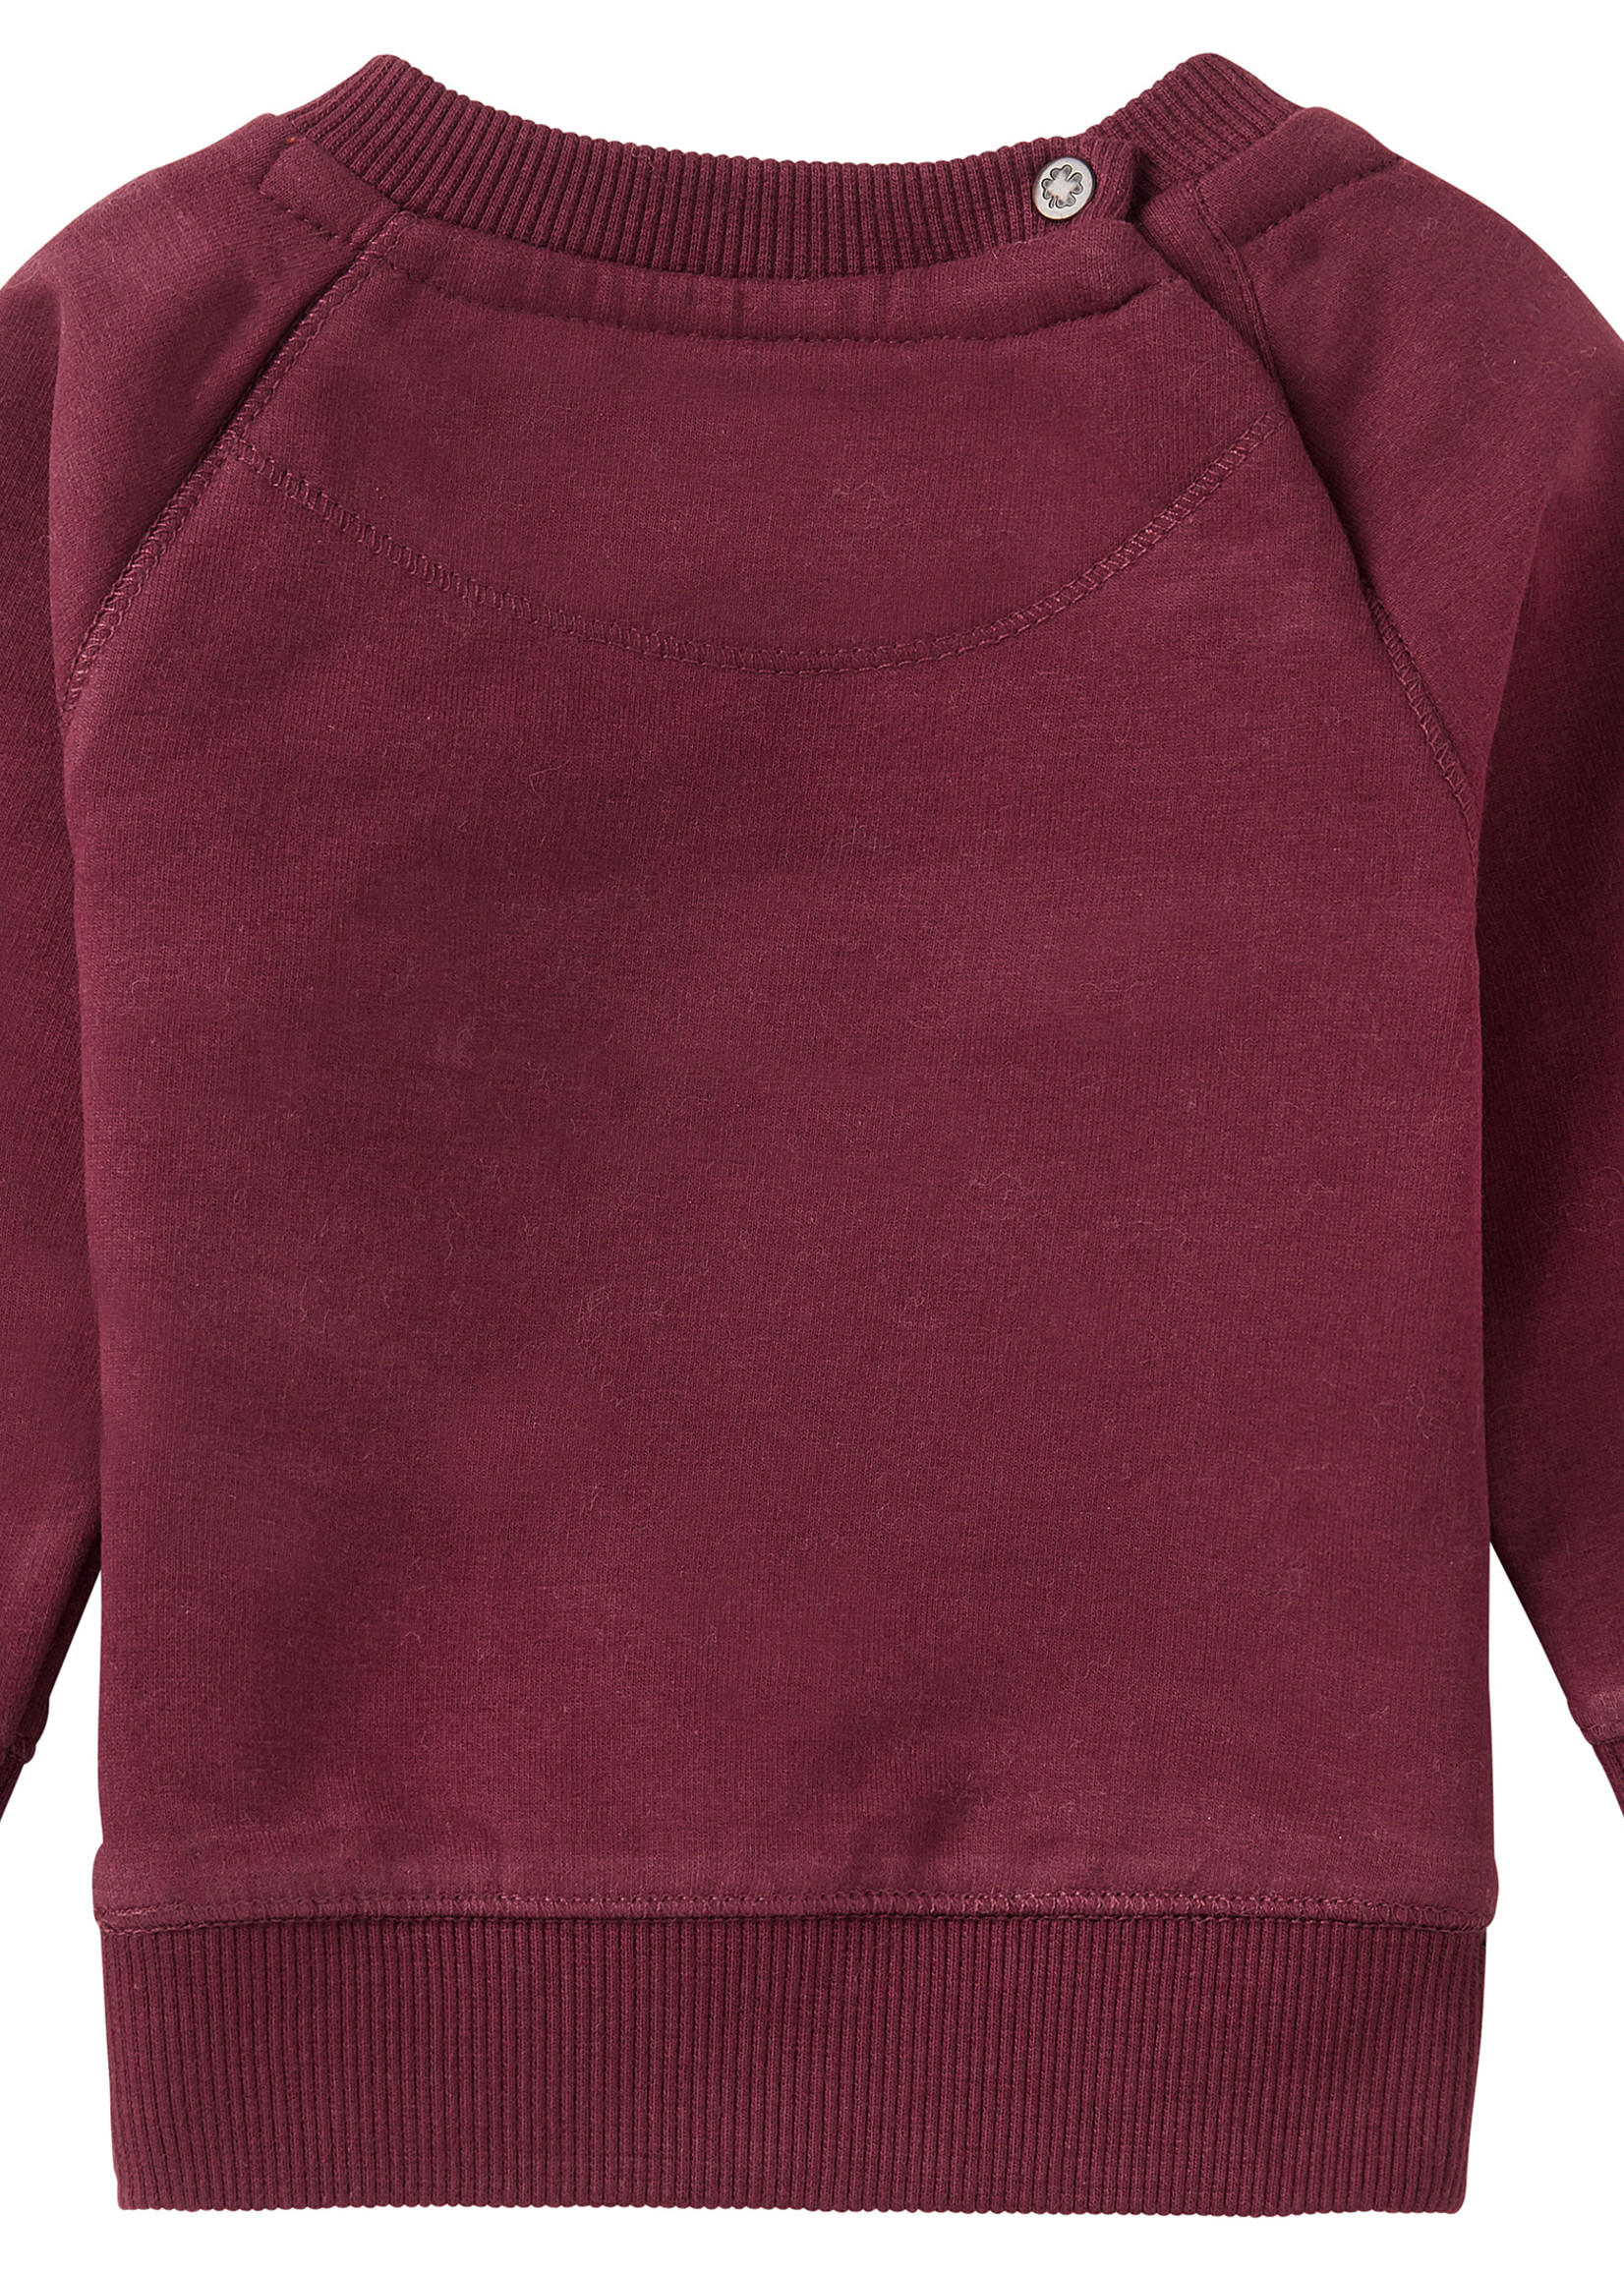 Noppies B Sweater LS Vredendal, Dusty Red